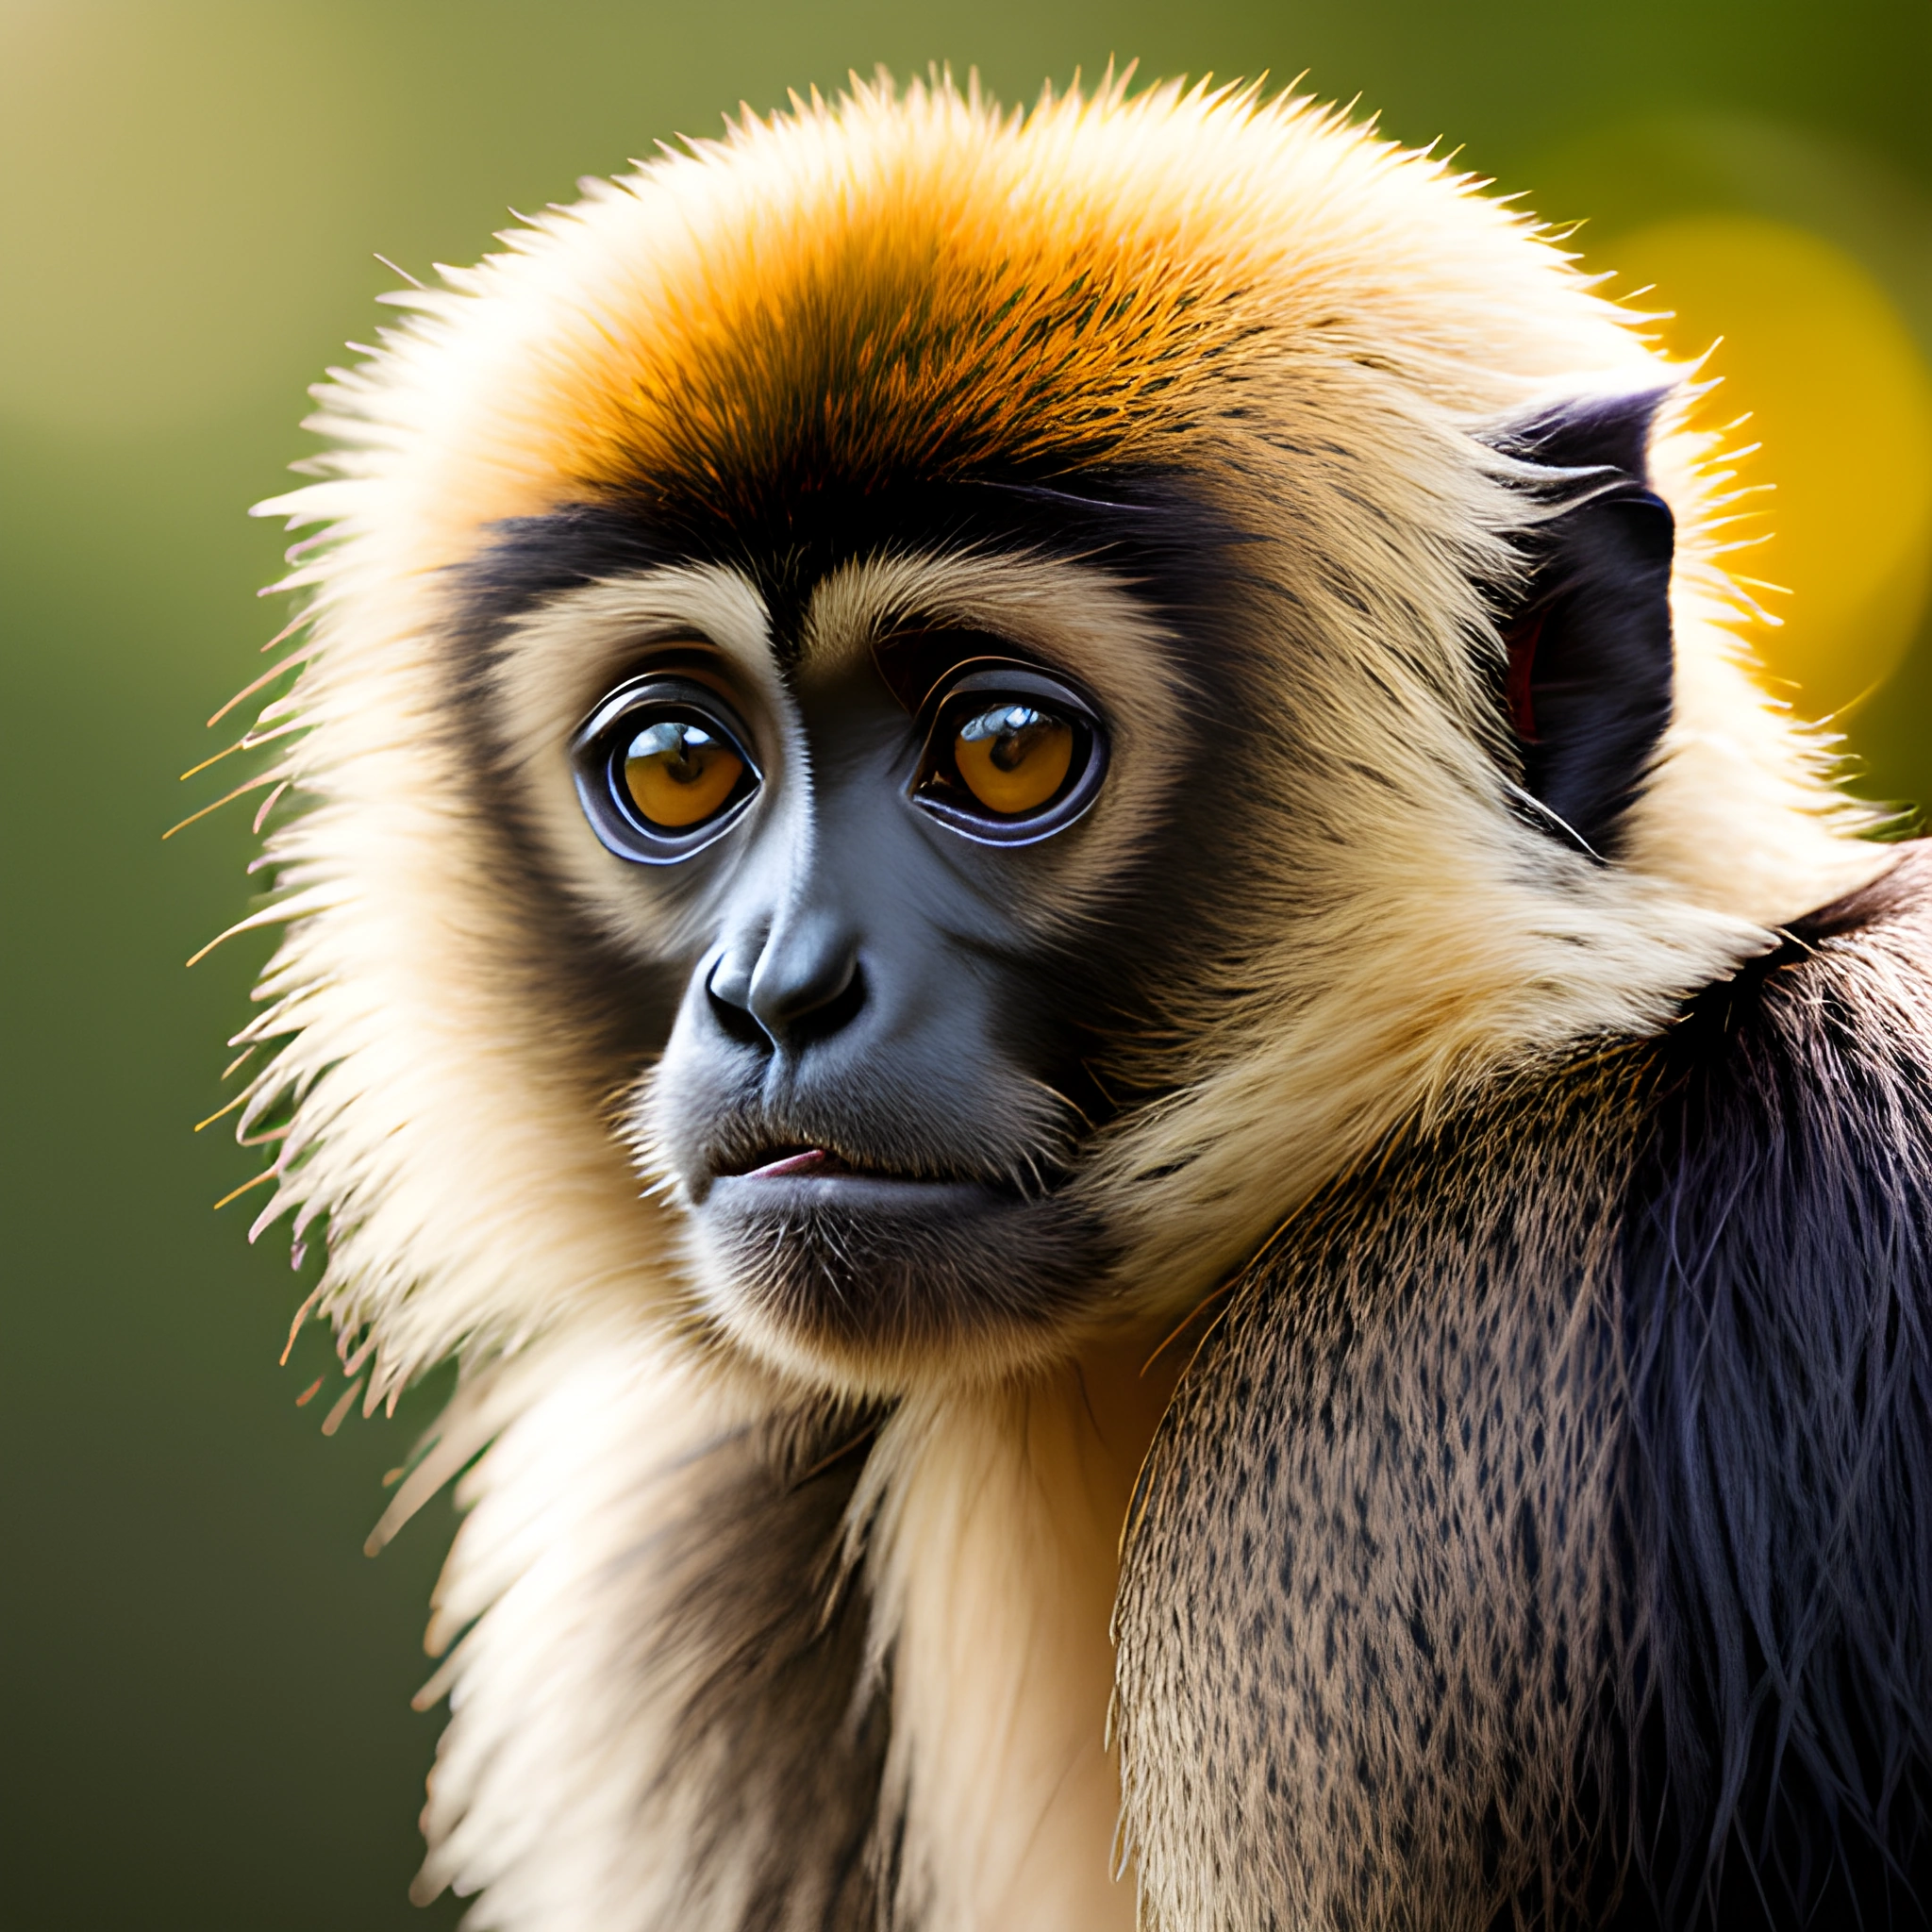 monkey with a yellow mohawk on its head